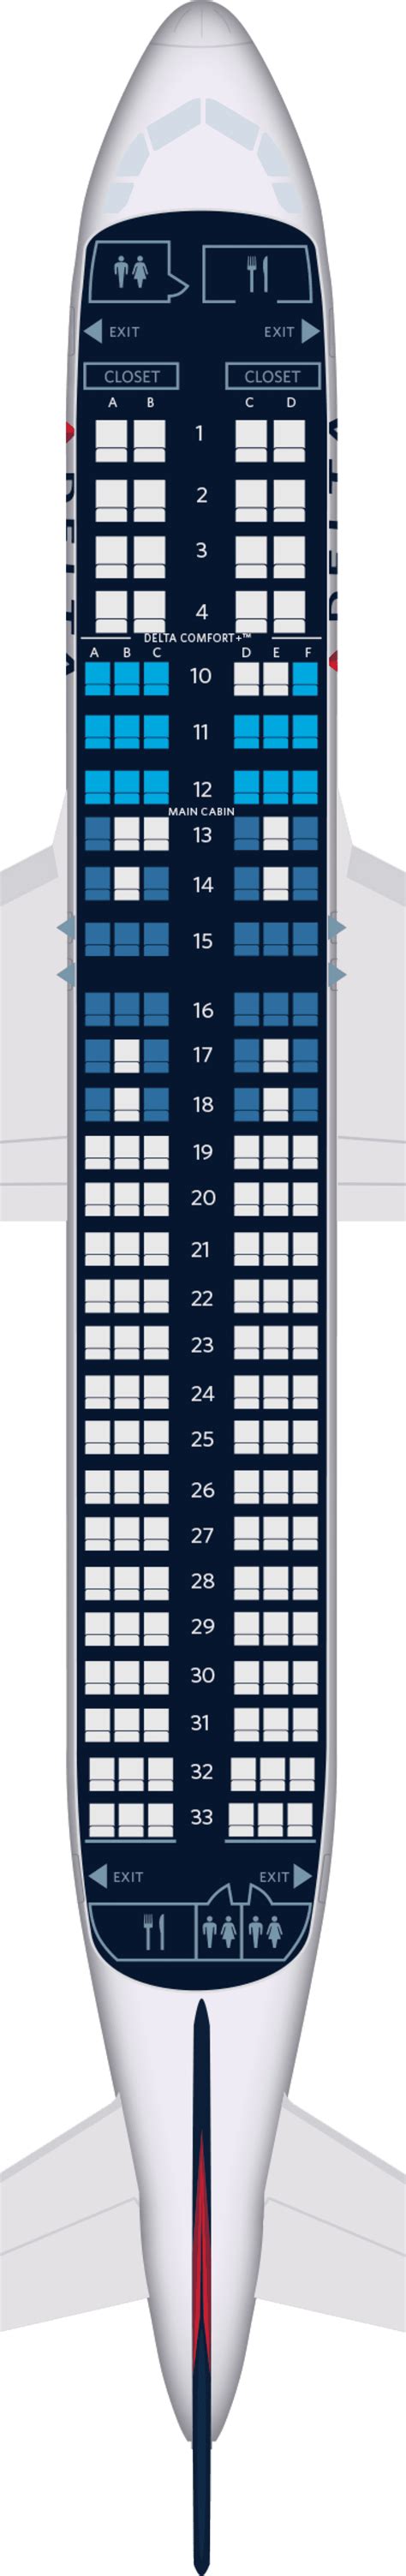 Airbus A320 Layout